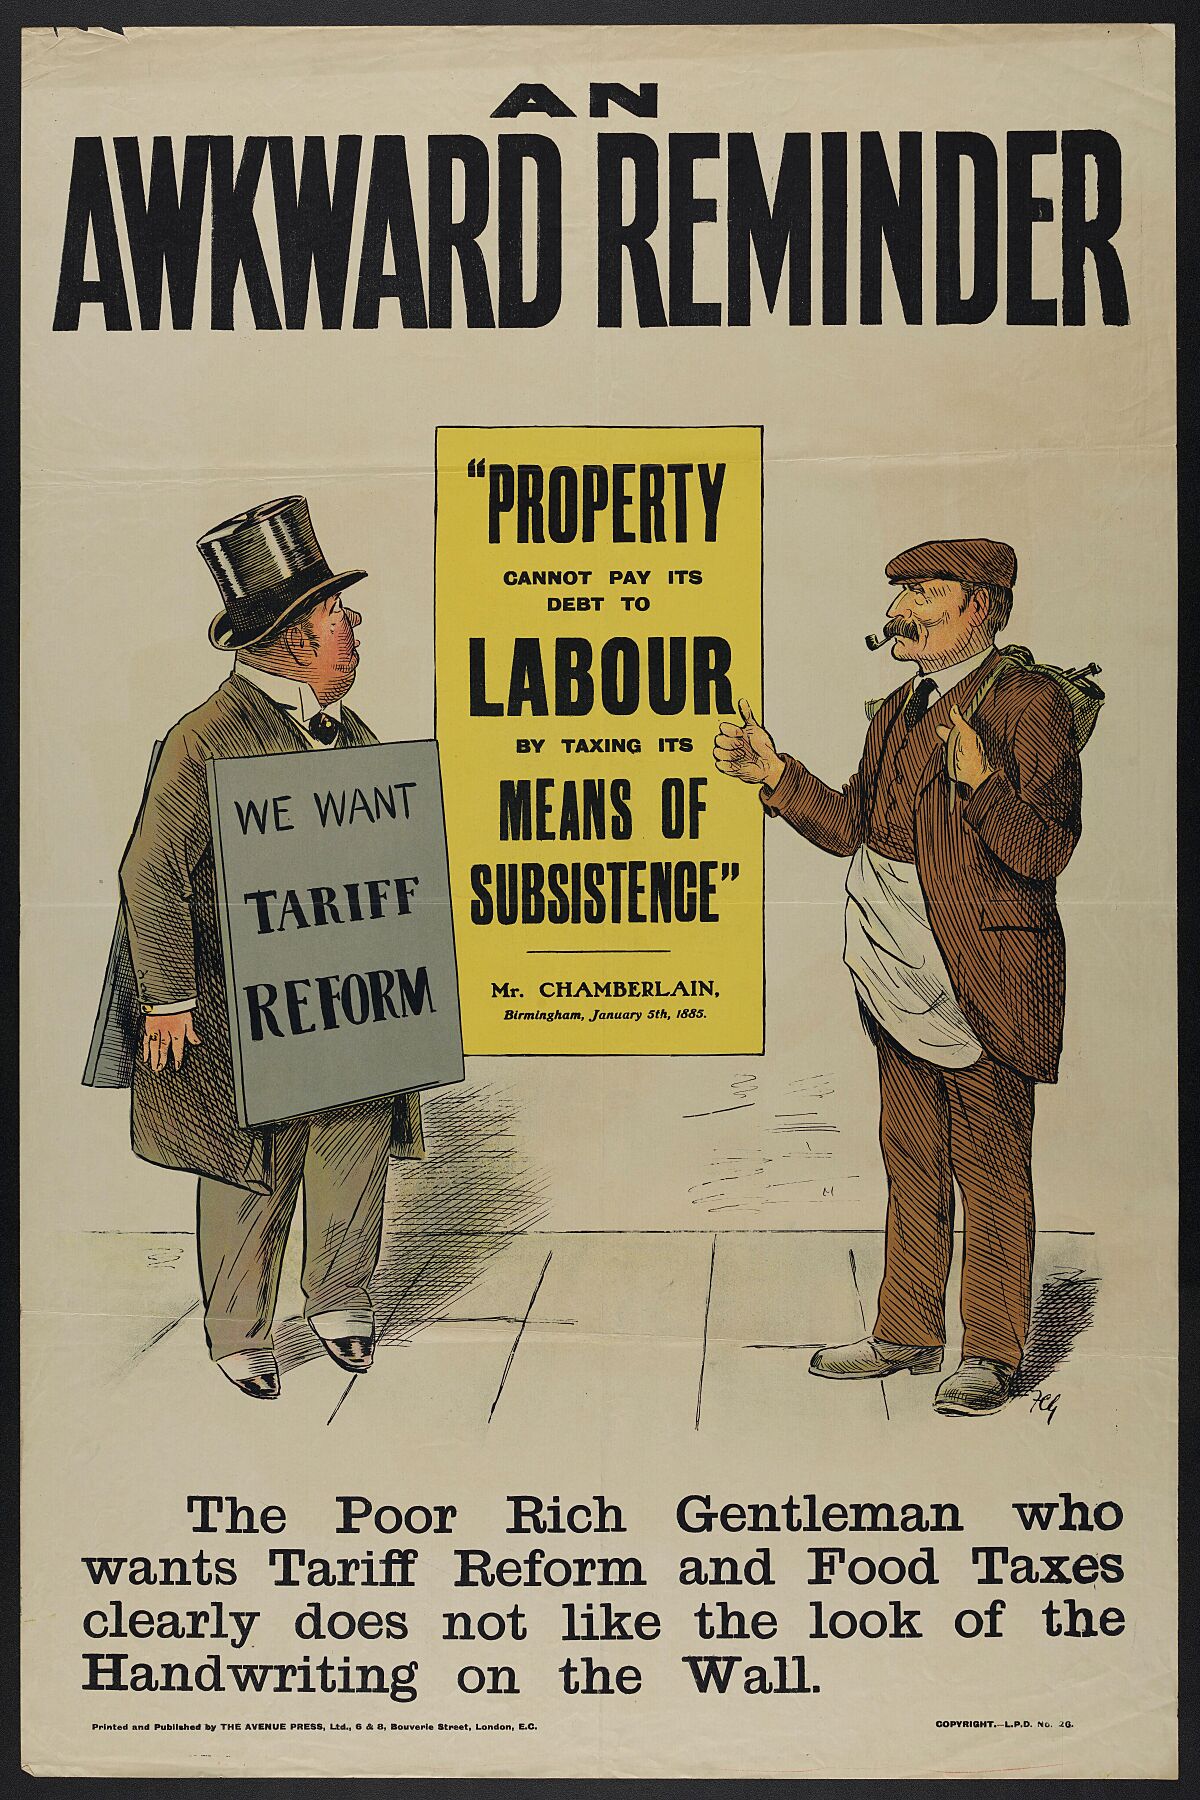 A rich man and a workman arguing about the budget introduced by the Liberal Government in the United Kingdom - ca. 1909.